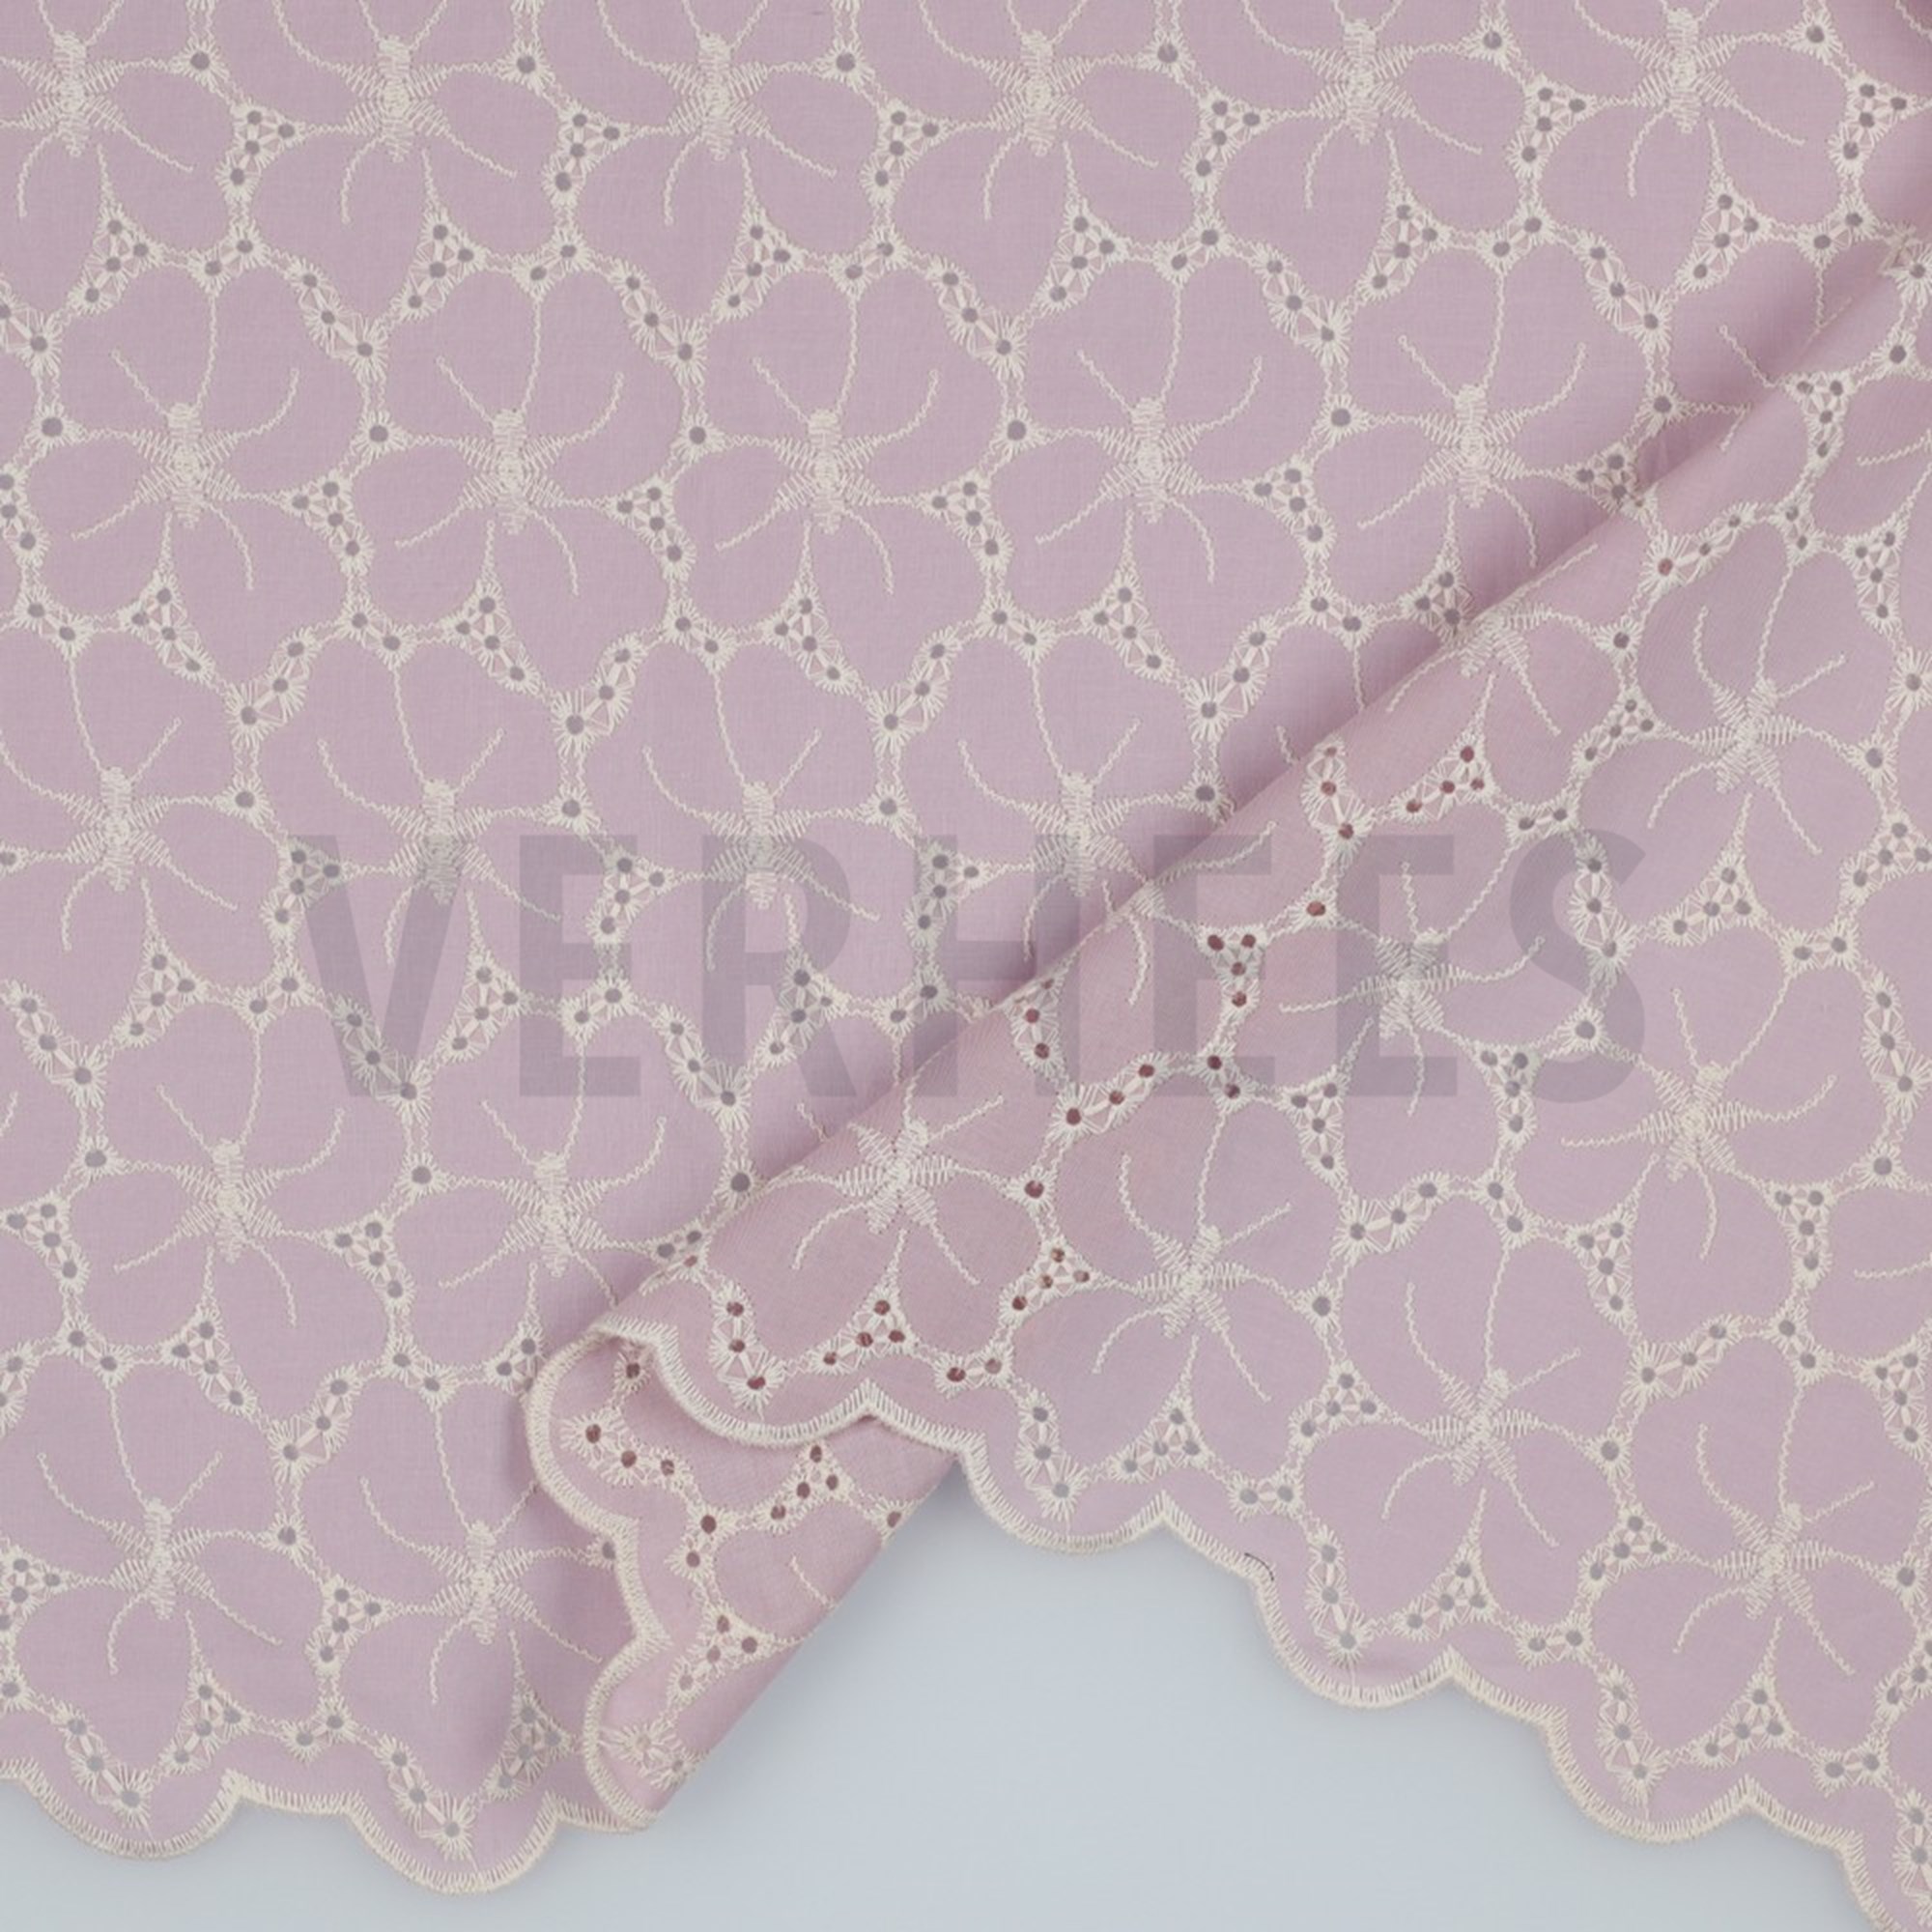 COTTON EMBROIDERY 2-SIDE BORDER CHERRY BLOSSOM (high resolution) #2